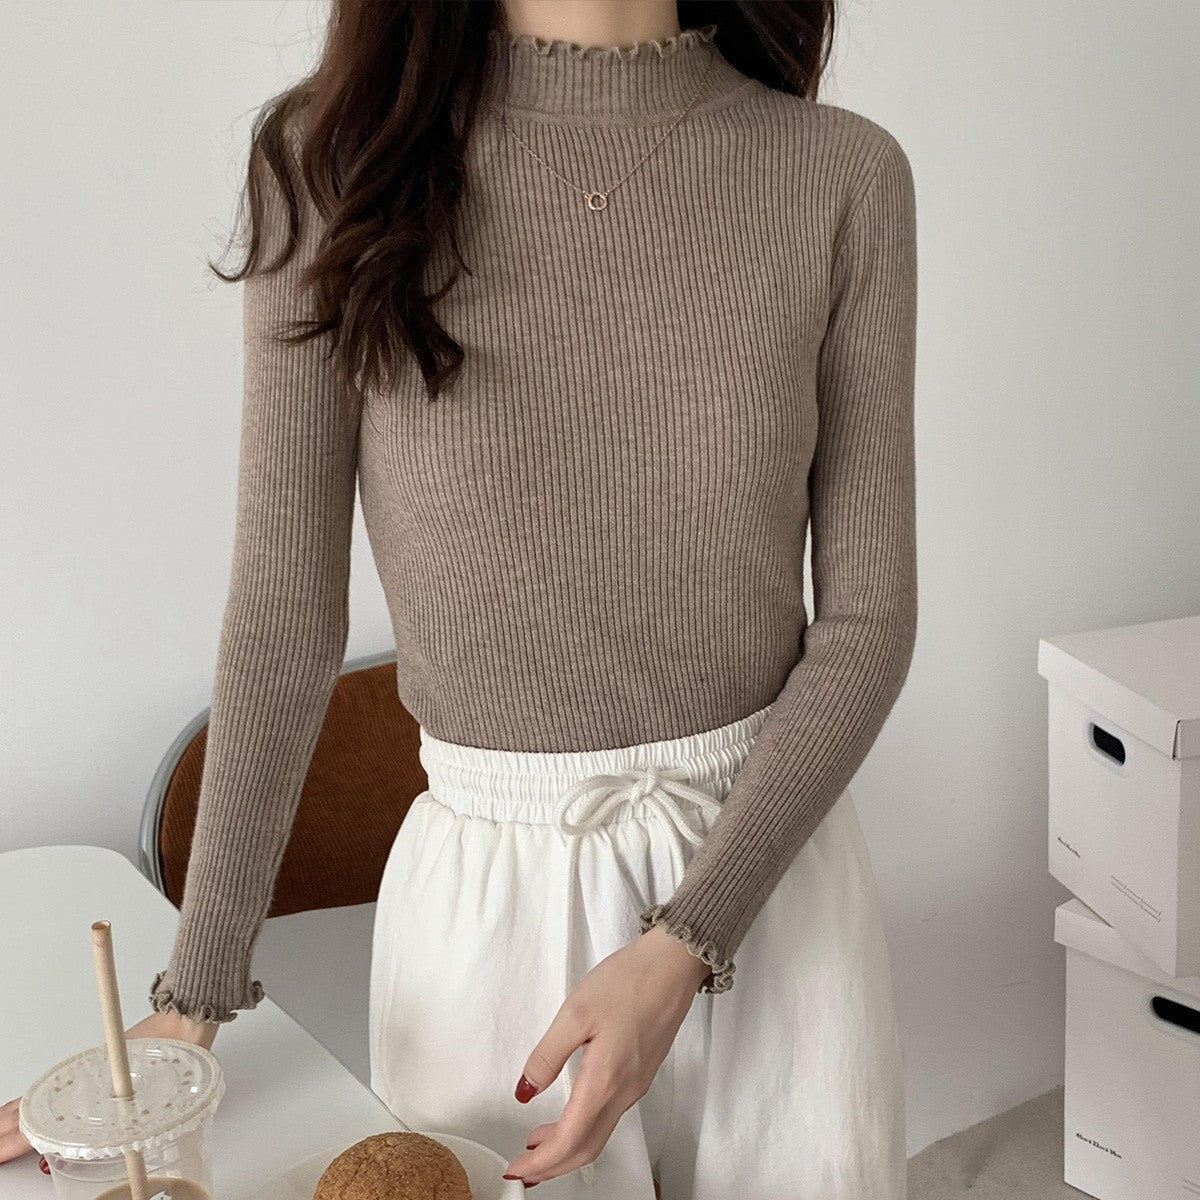 Half High Collar Inner Lining Bottom Sweater Slim Fit Fit Long Sleeved Sweater